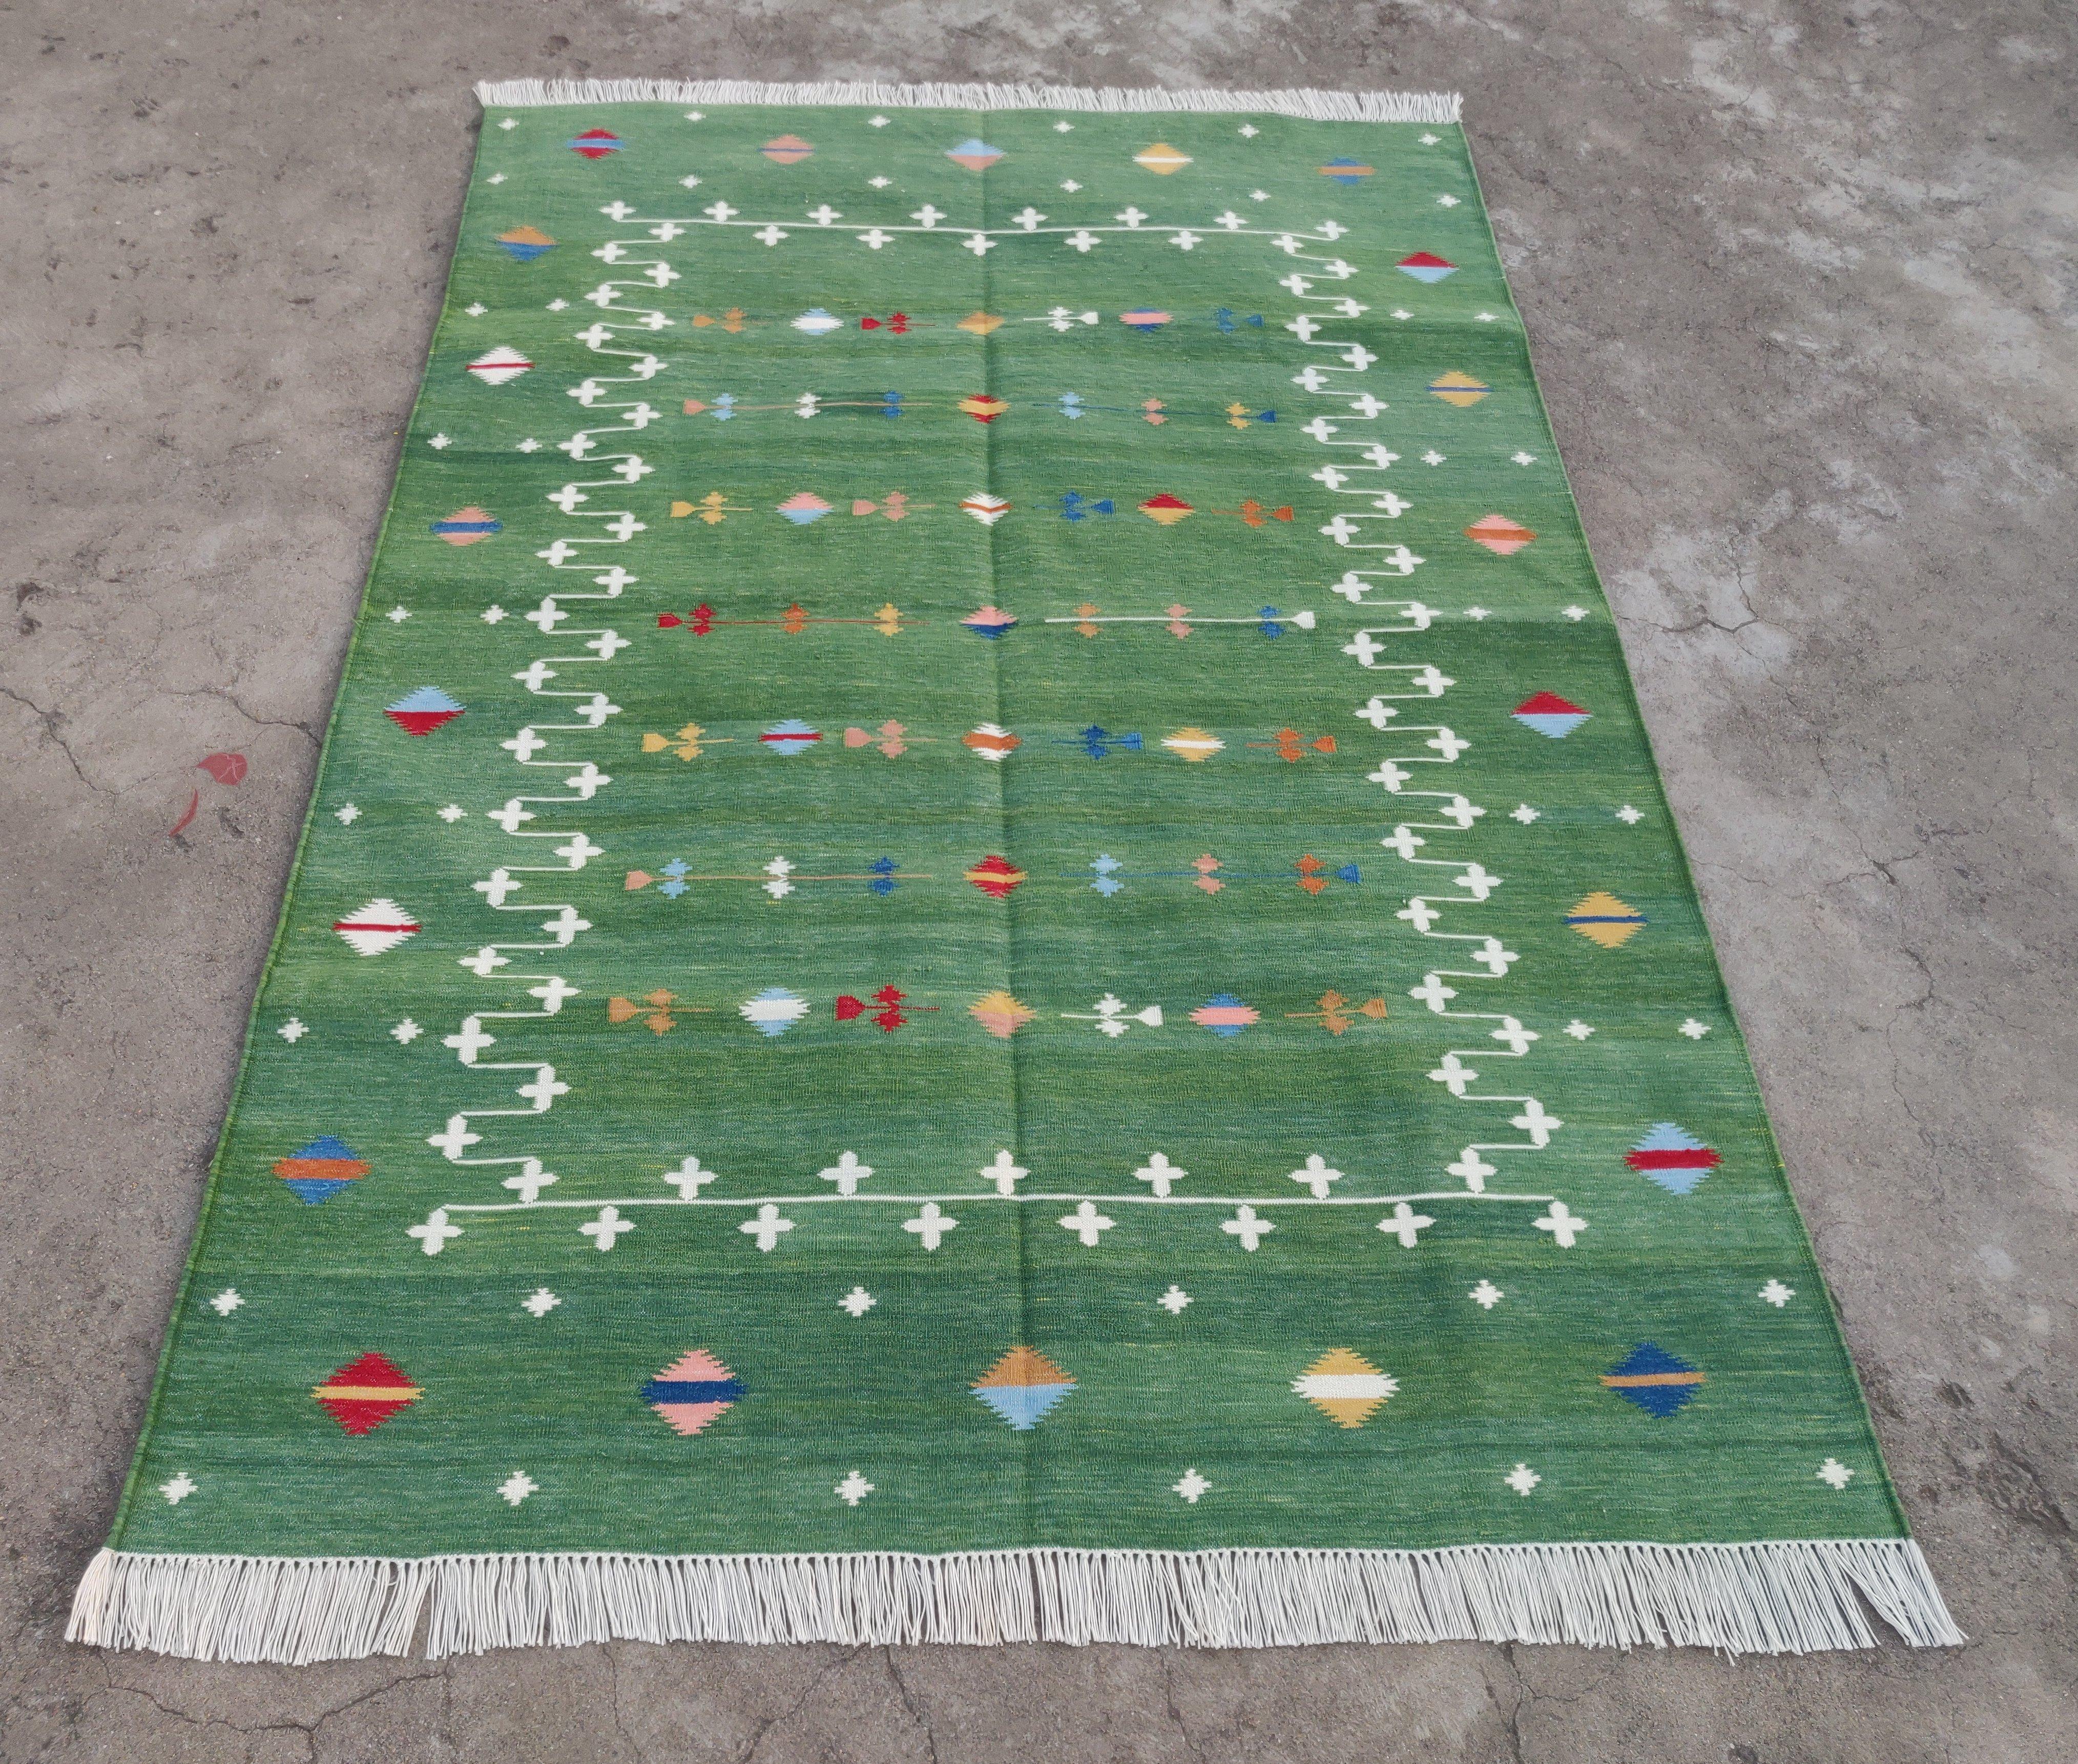 Contemporary Handmade Cotton Area Flat Weave Rug, 4x6 Green Shooting Star Indian Dhurrie Rug For Sale